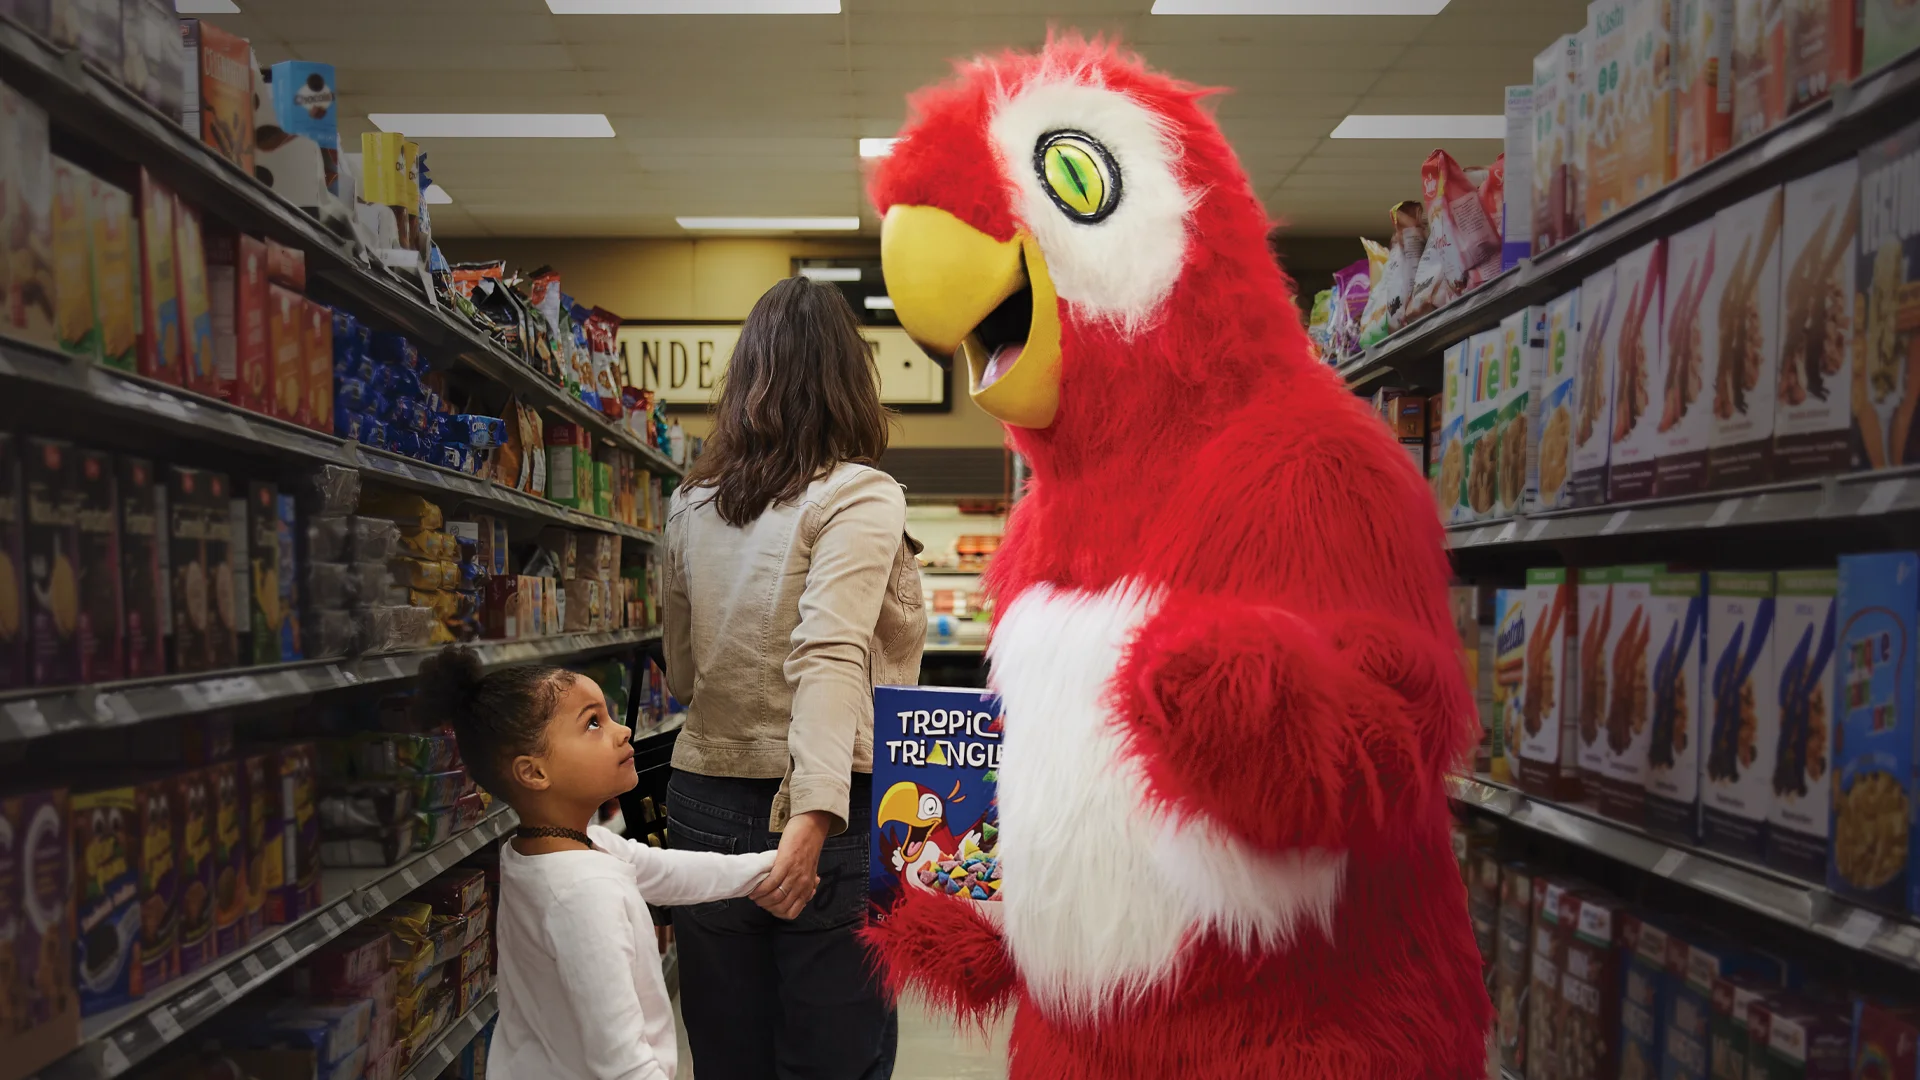 A person in a costume entices a girl into buying cereal at the grocery store.